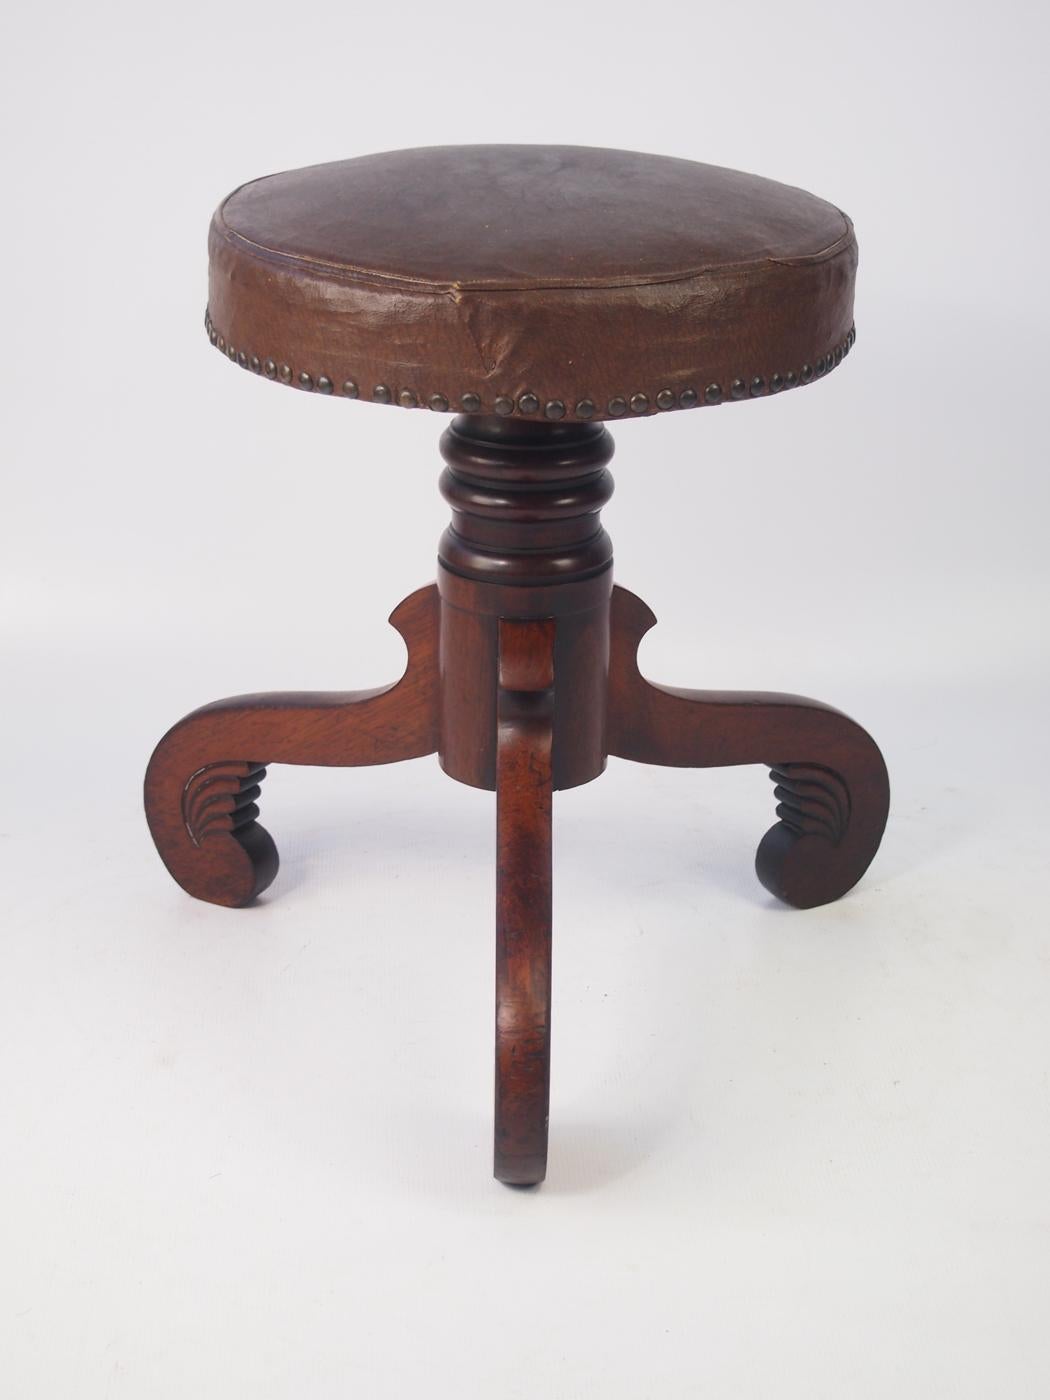 19th Century Antique English Victorian Mahogany Rise and Fall Piano Stool Regency Music Chair For Sale